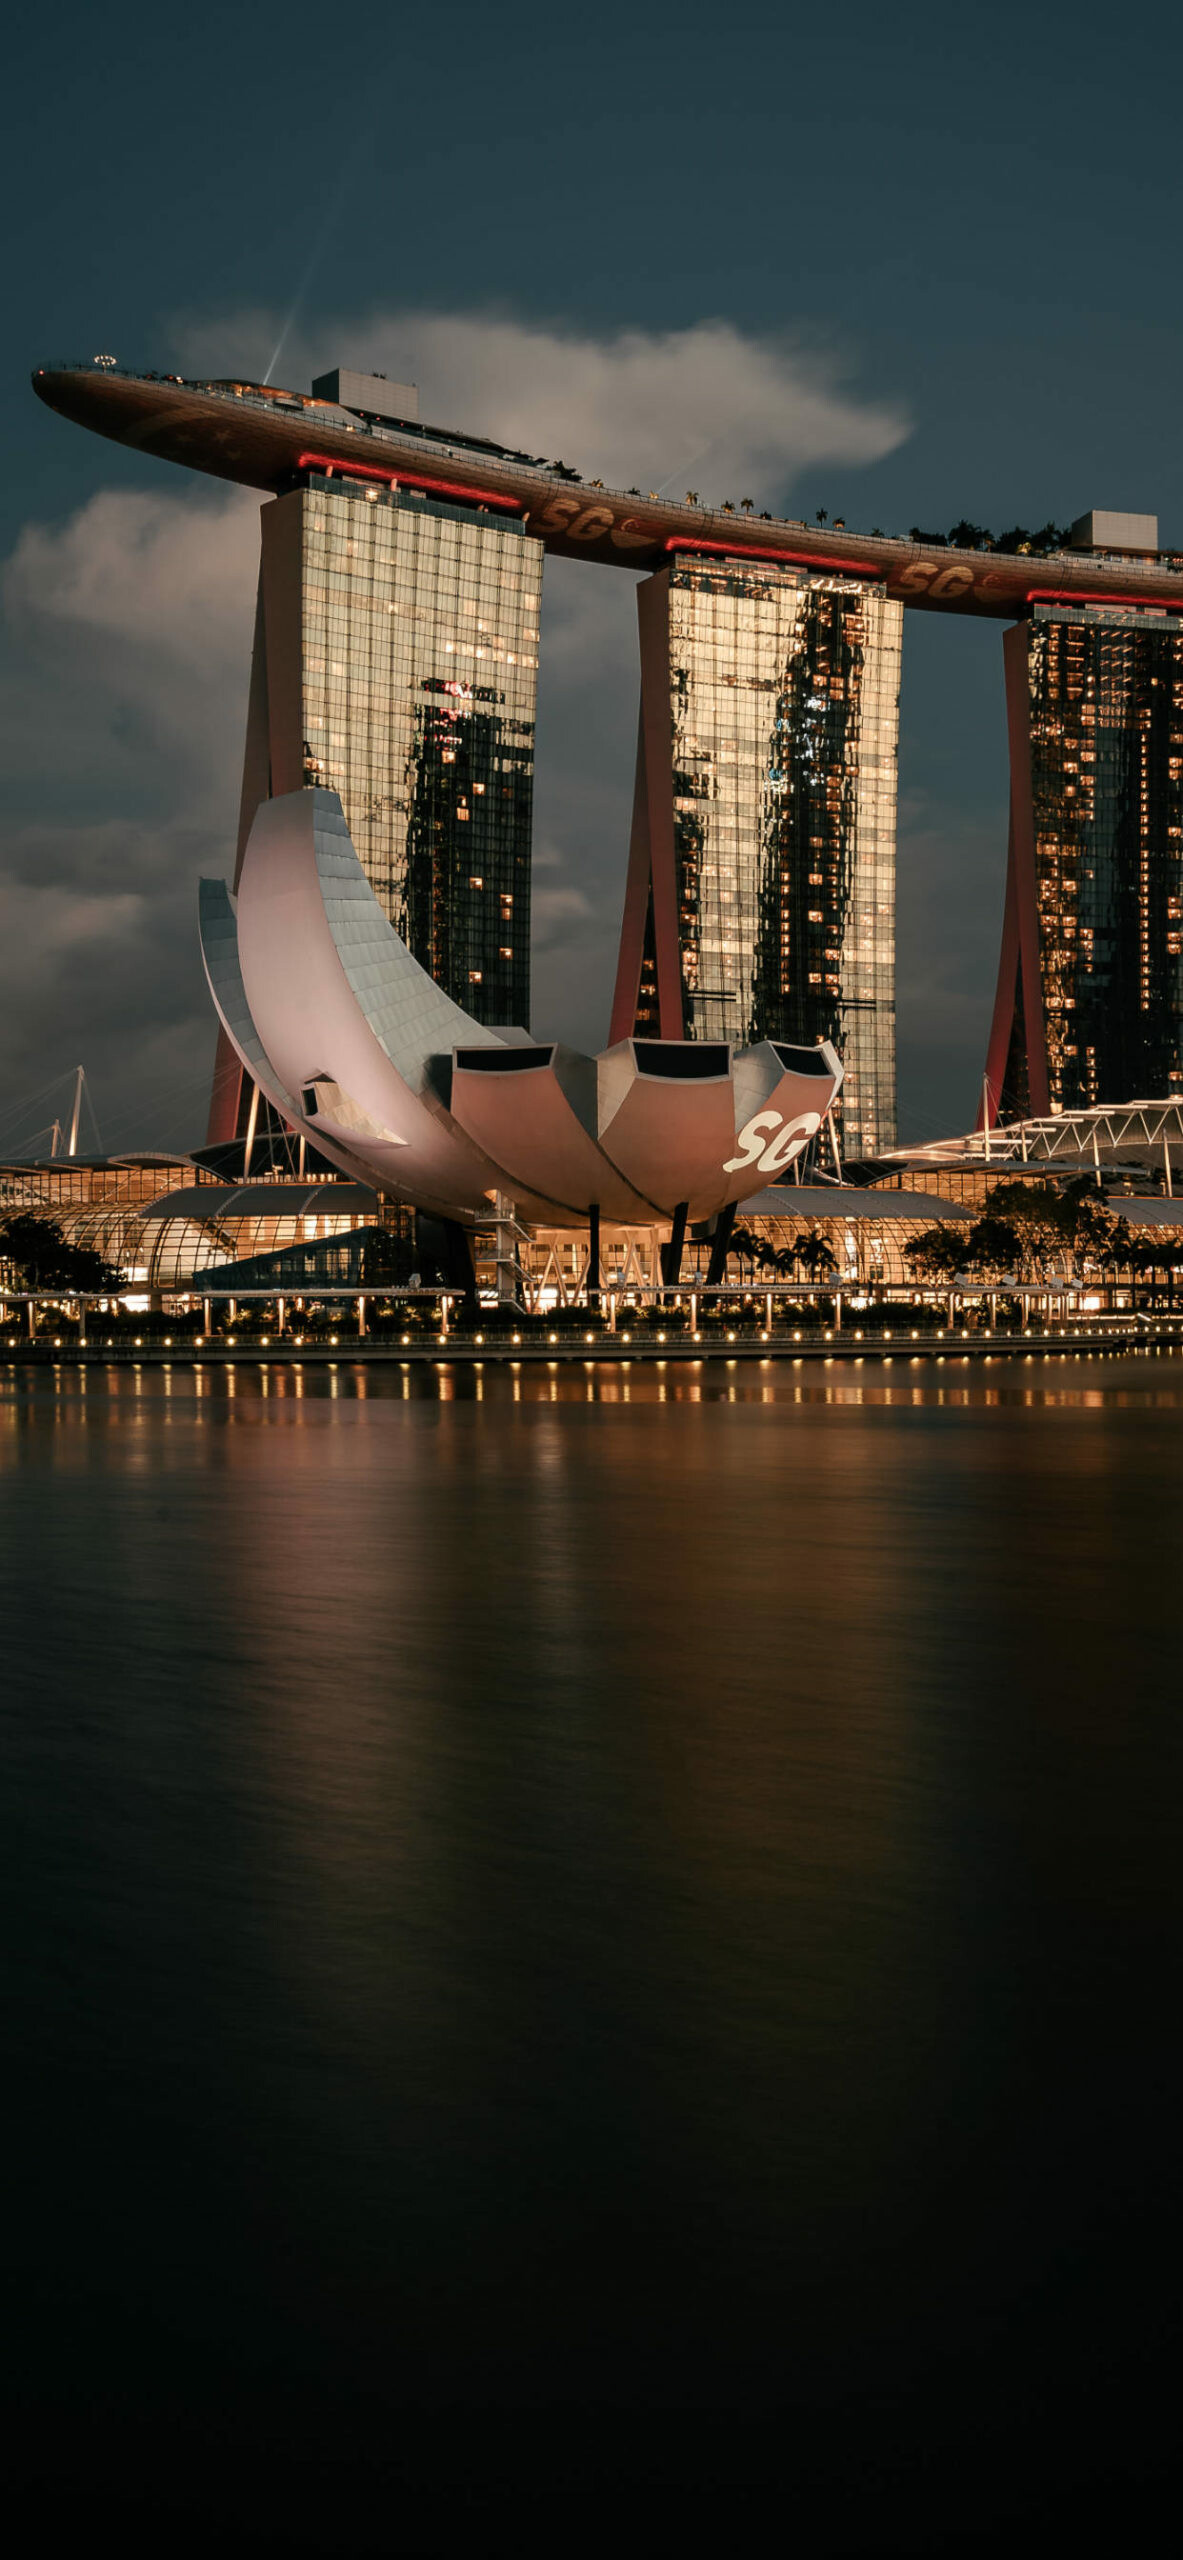 Singapore: MBS, Marina Bay Sands, The world's most expensive standalone casino property. 1190x2560 HD Wallpaper.